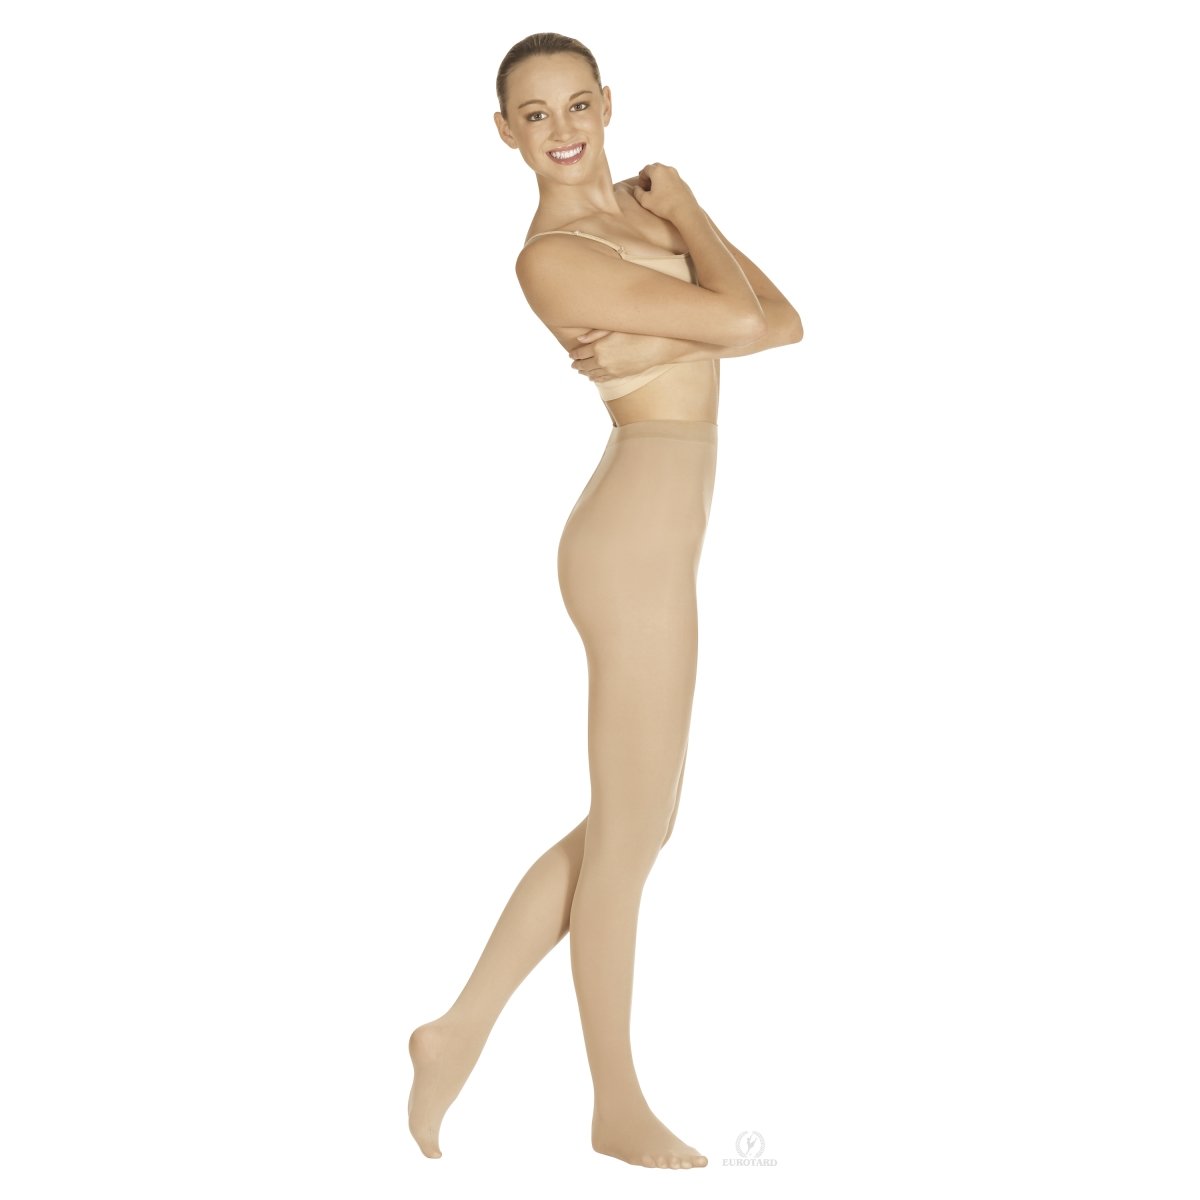 215-st-l-xl Intimates Adult Non-run Footed Tights, Suntan - Large & Extra Large